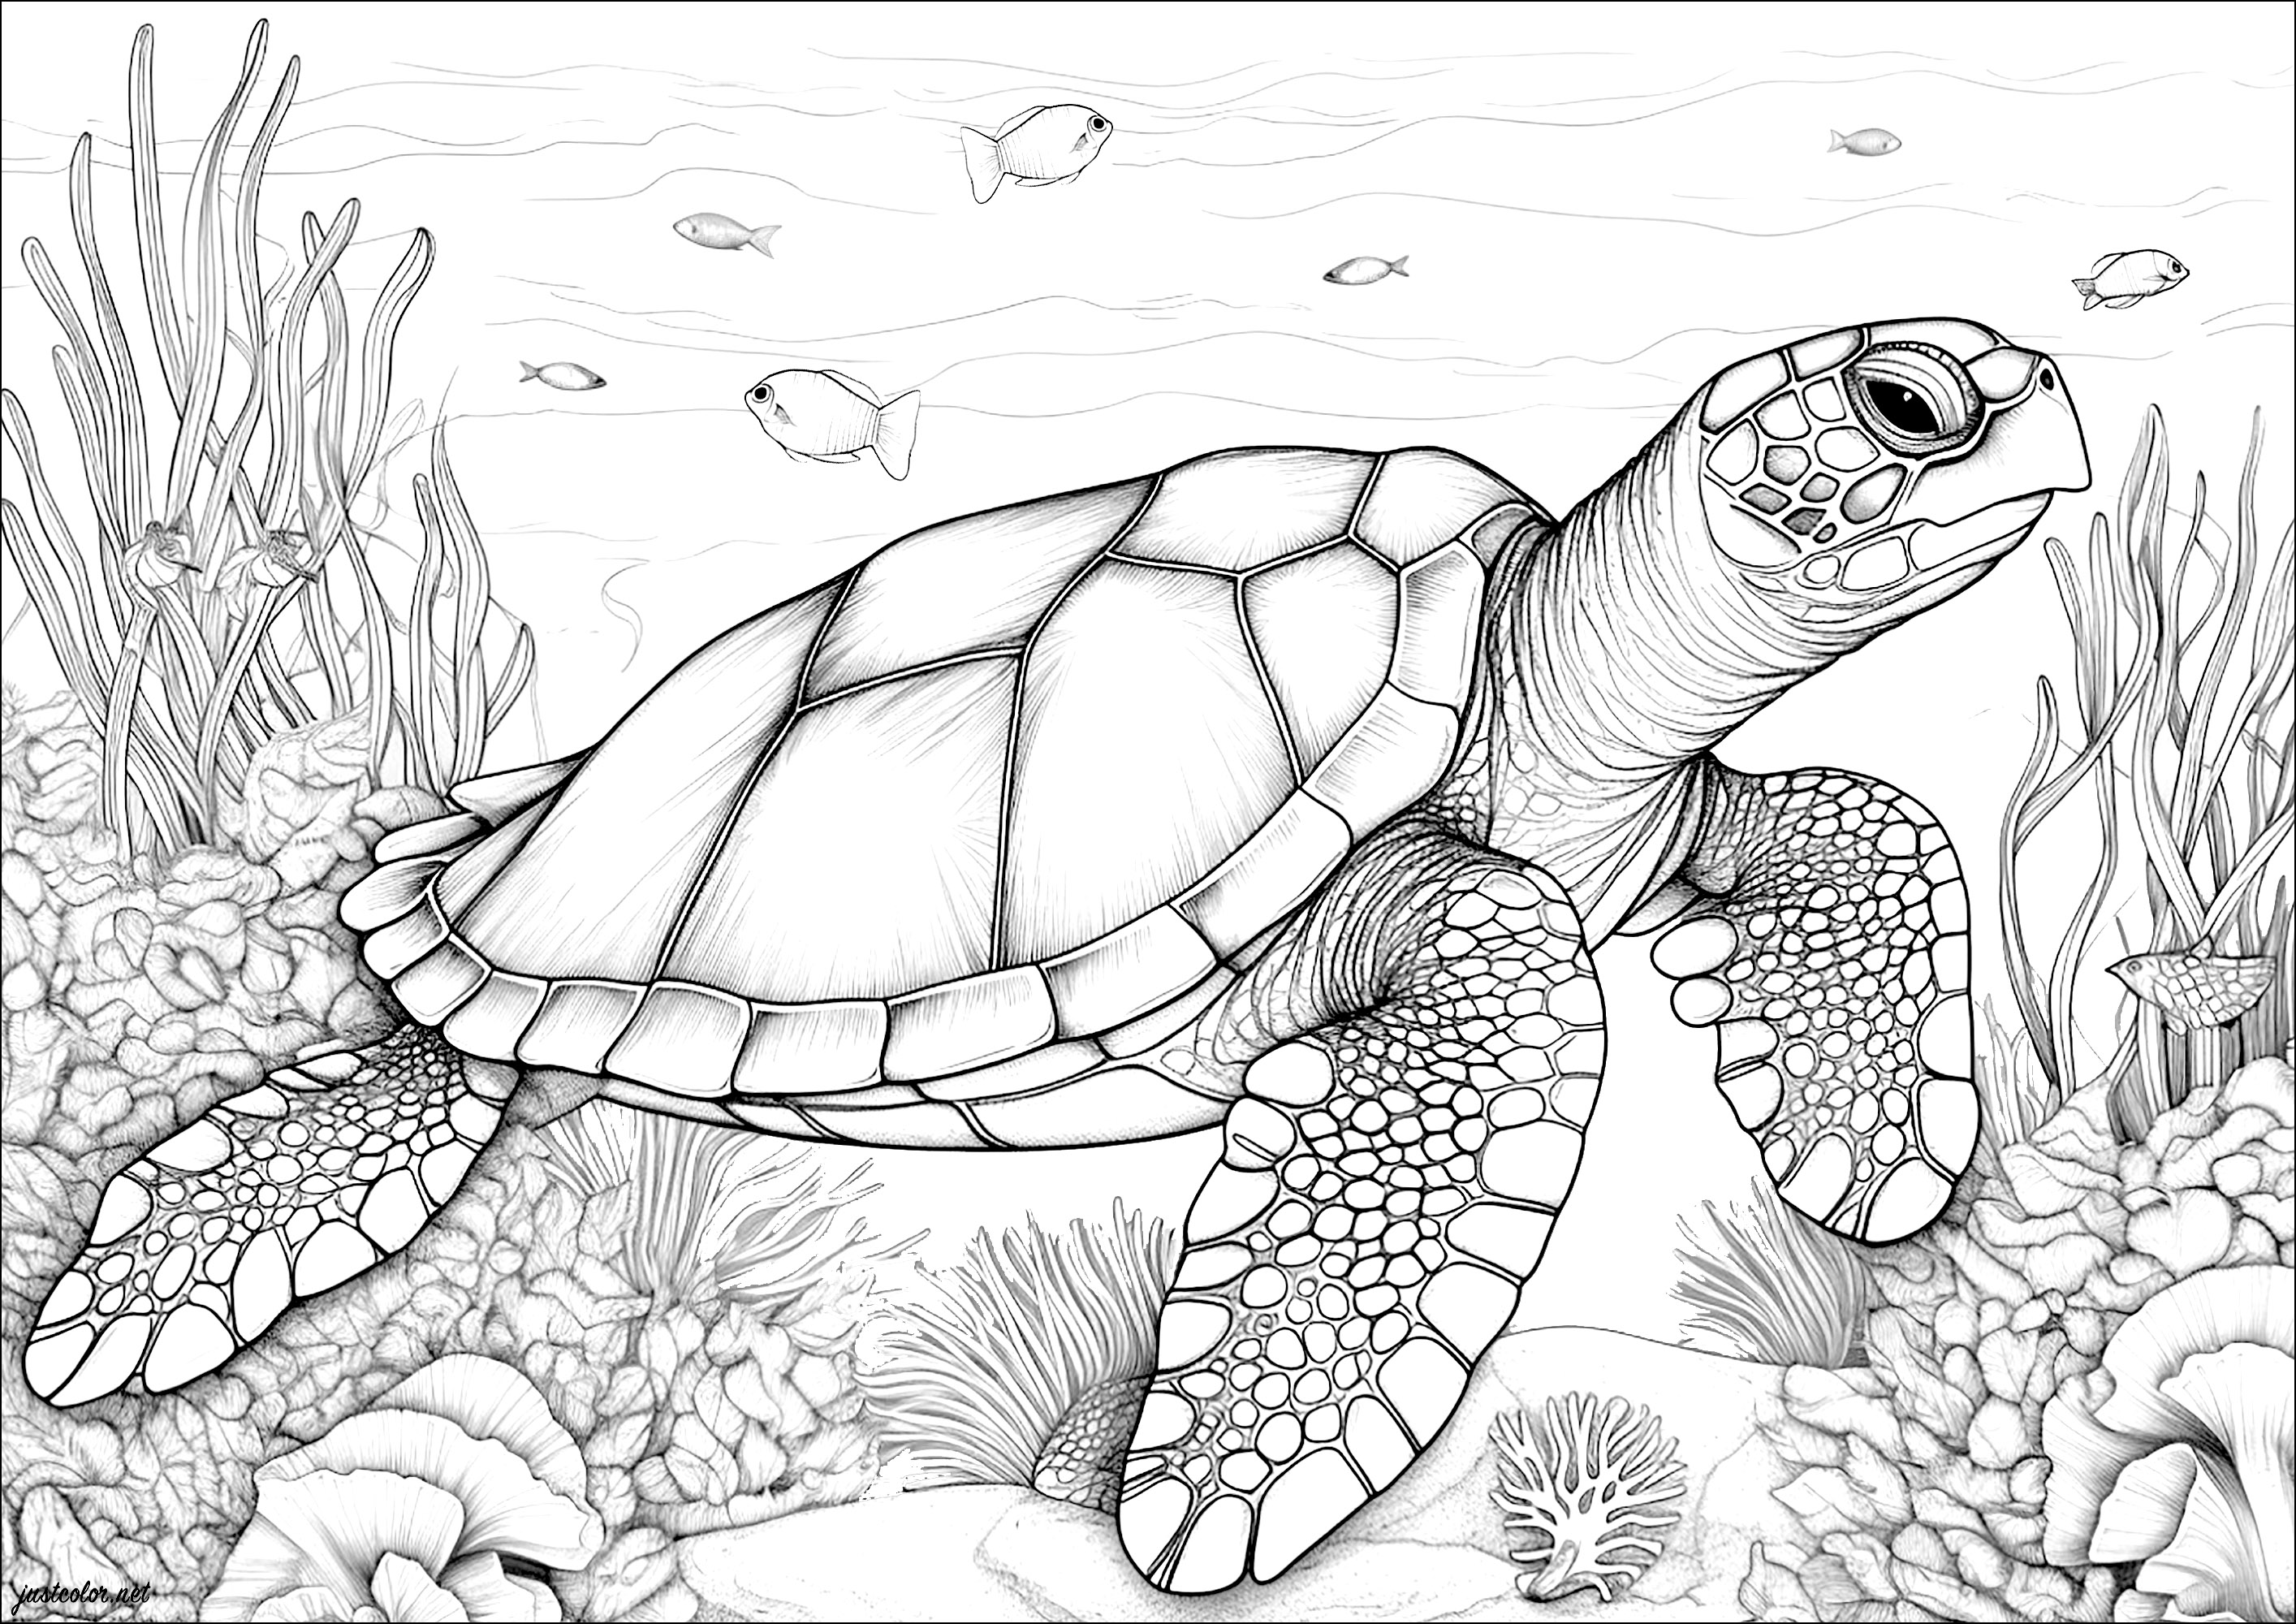 Sea turtles, fish and corals. Many details to color in this beautiful aquatic decor